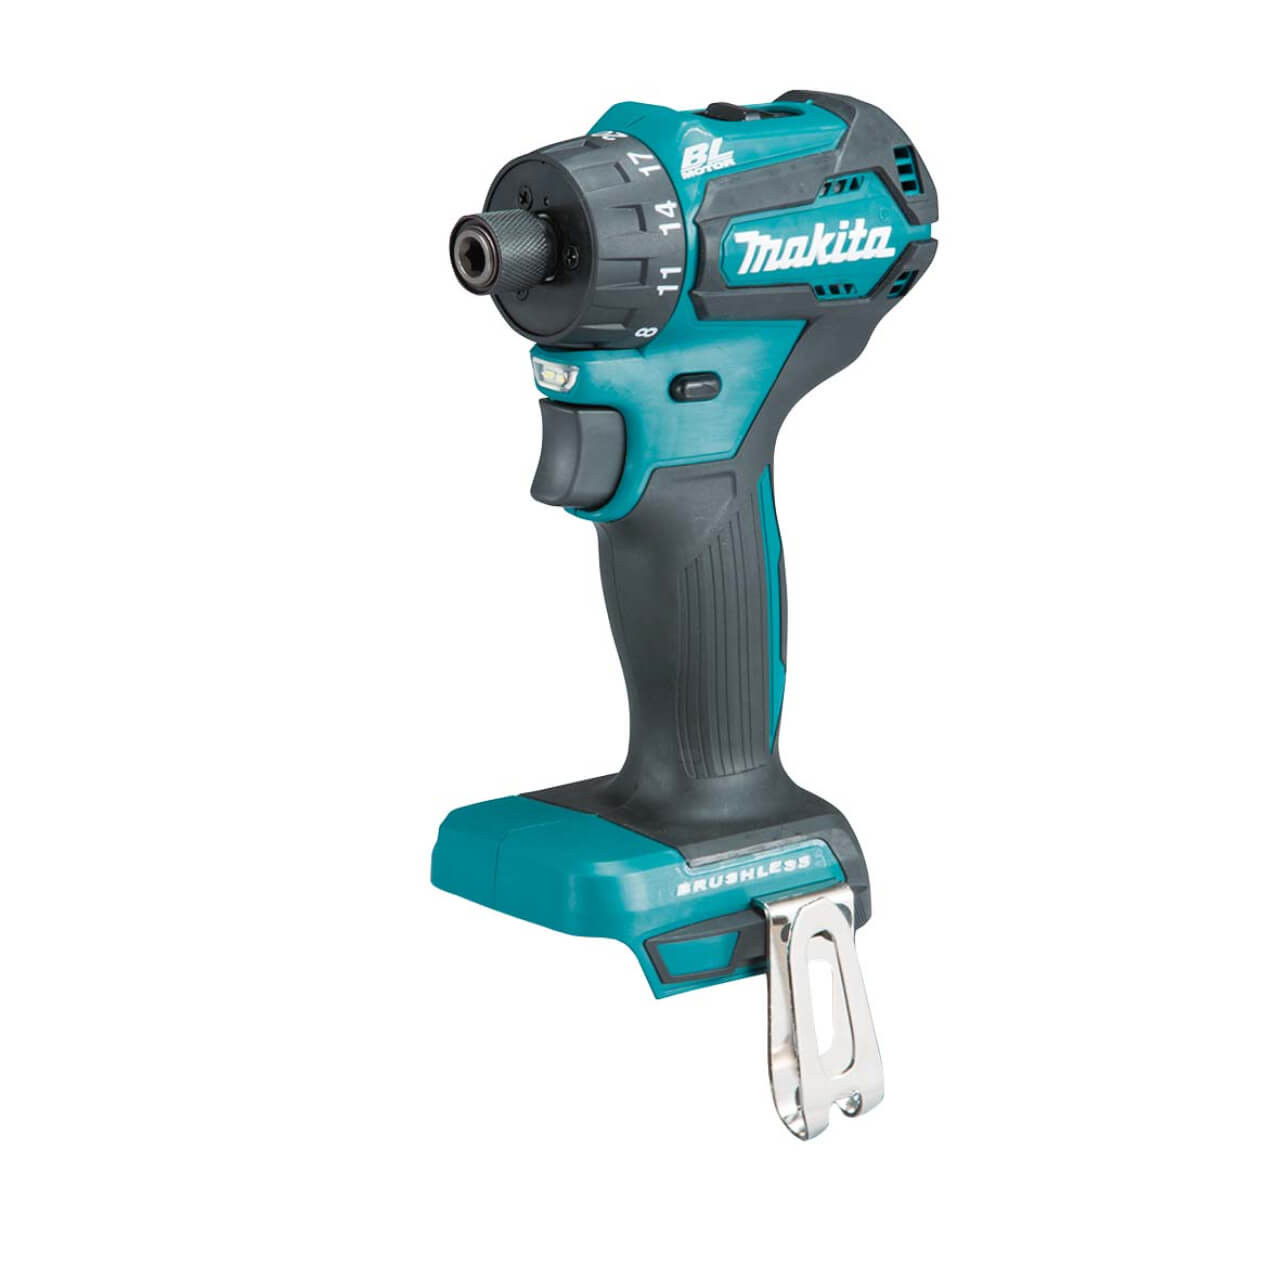 Makita 18V SUB-COMPACT BRUSHLESS 1/4” Hex Chuck Driver Drill - Tool Only